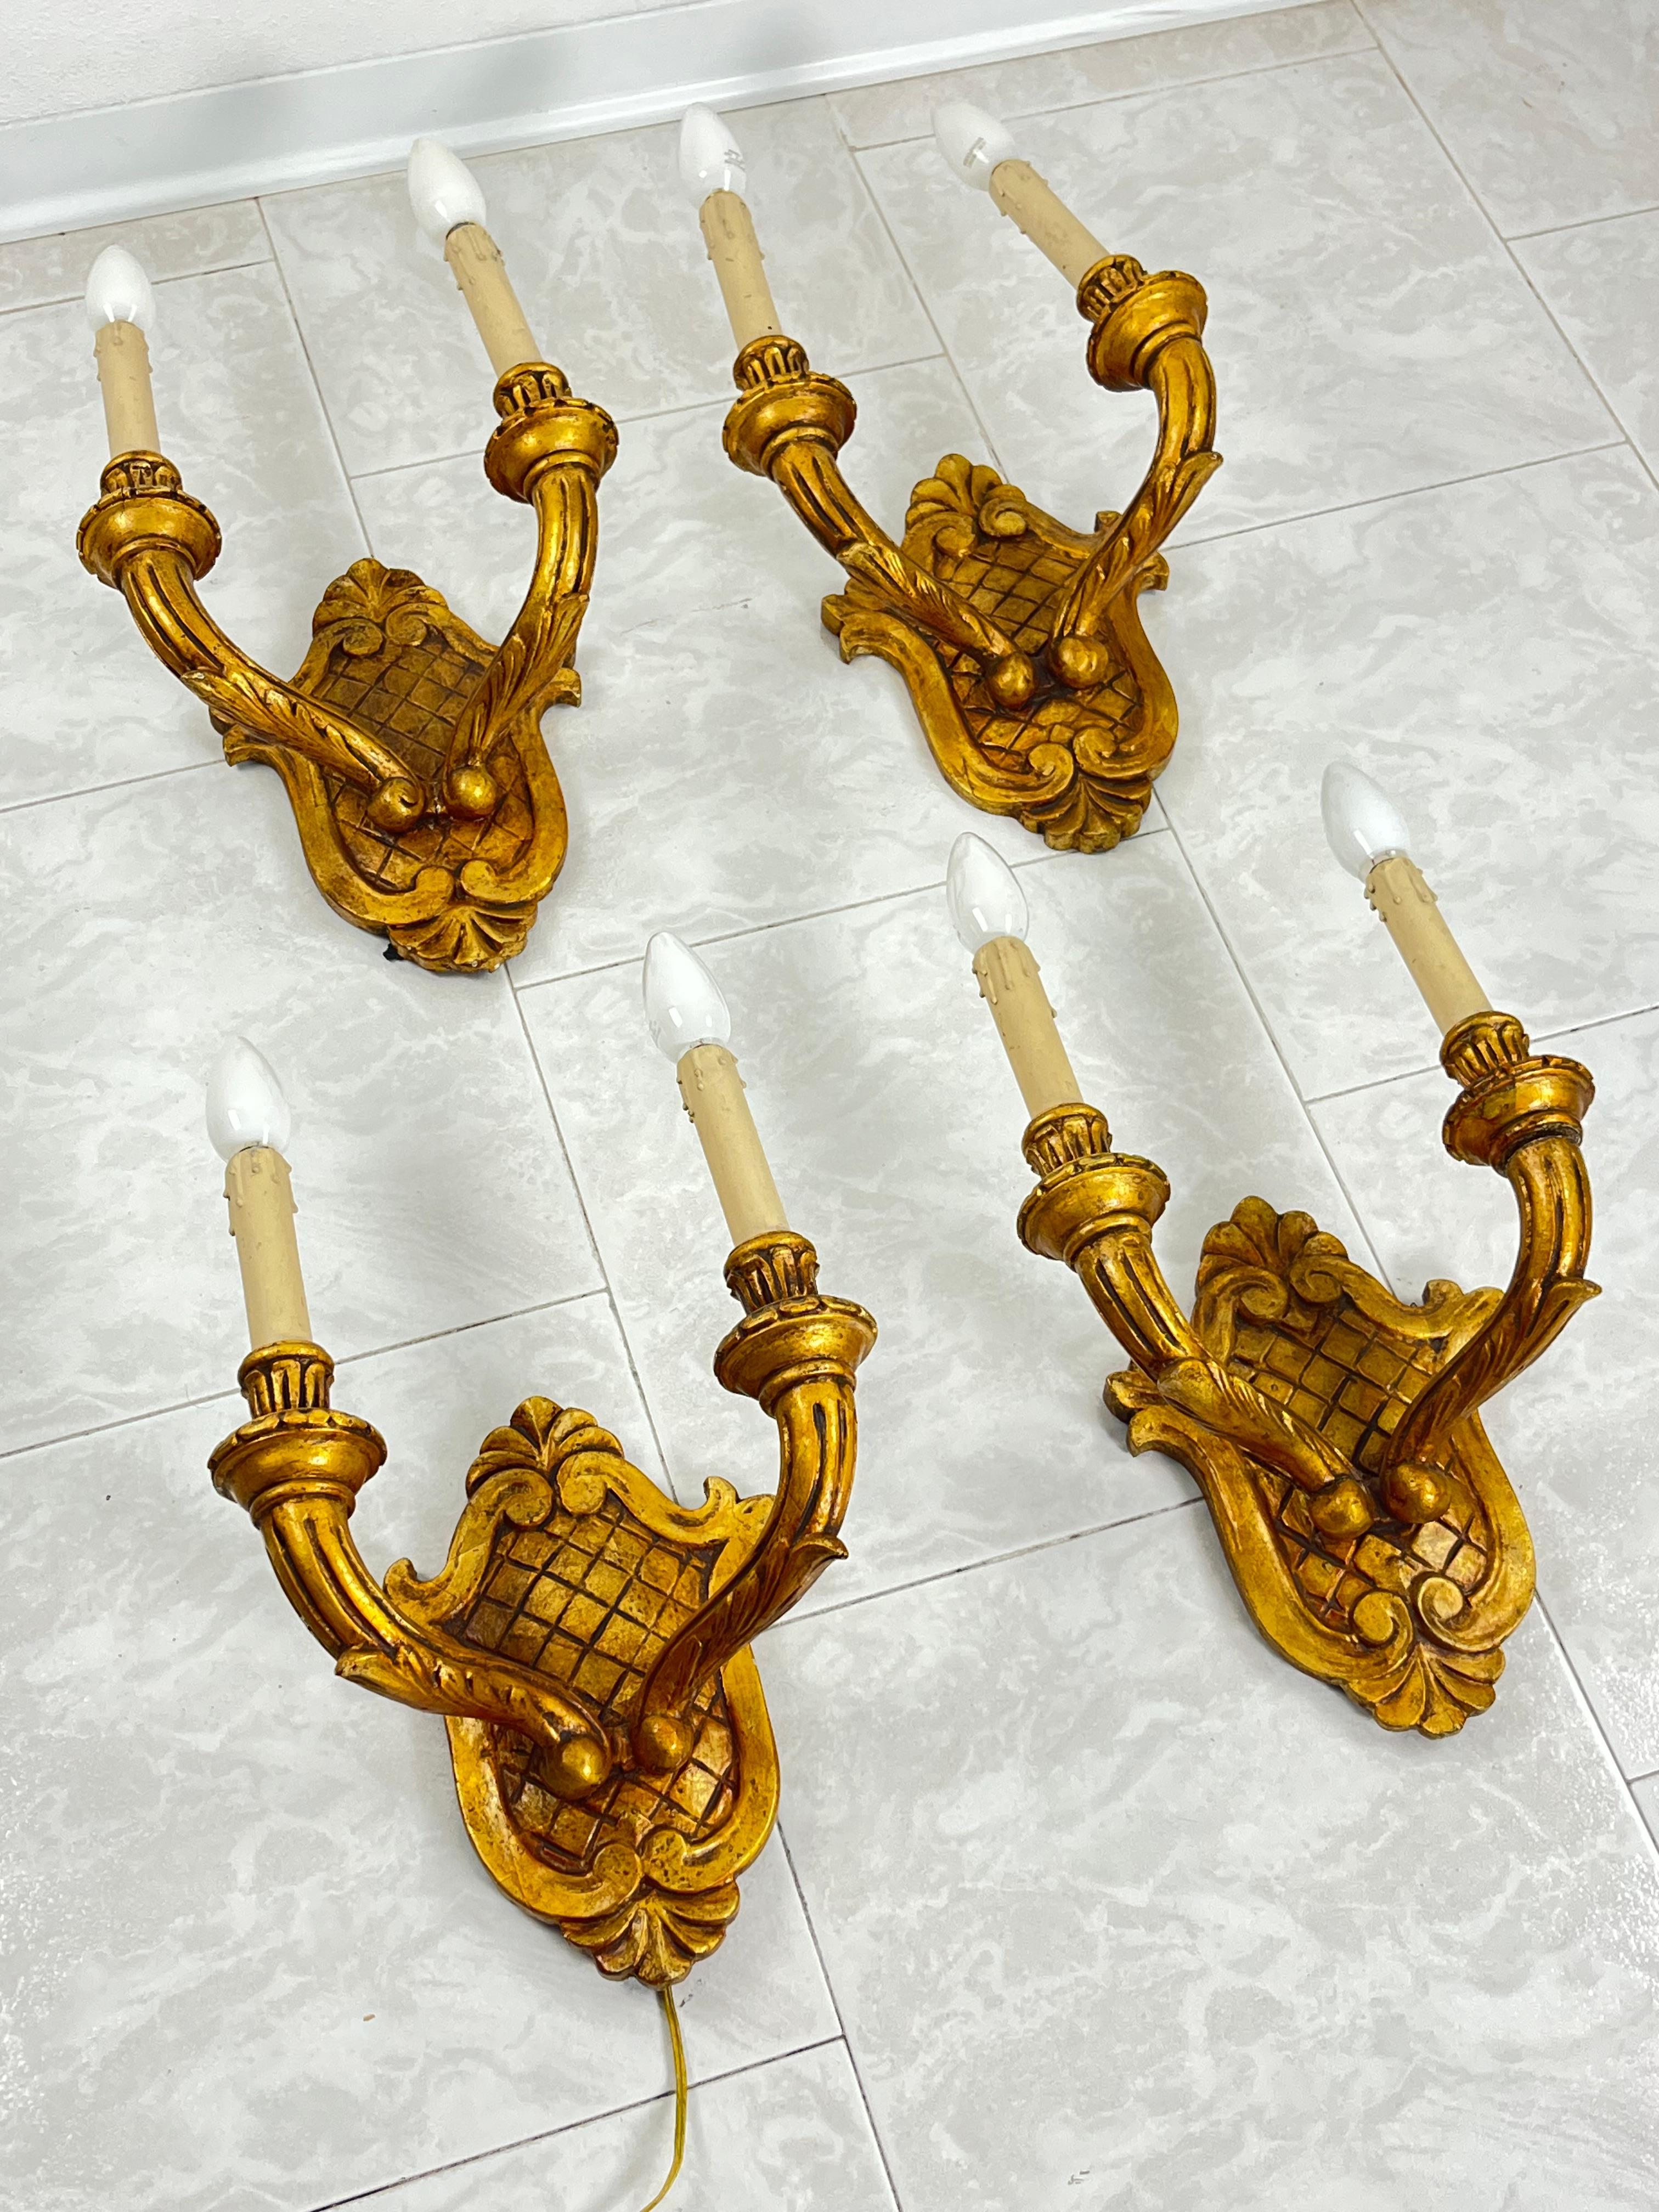 Set of 4 Mid-century hand-carved gilt wood wall lamps 1960s
Each has 2 slots for e14 lamps.
Intact and in good condition, small signs of aging.
Very beautiful and elegant, they will give a touch of class to an elegant and refined environment